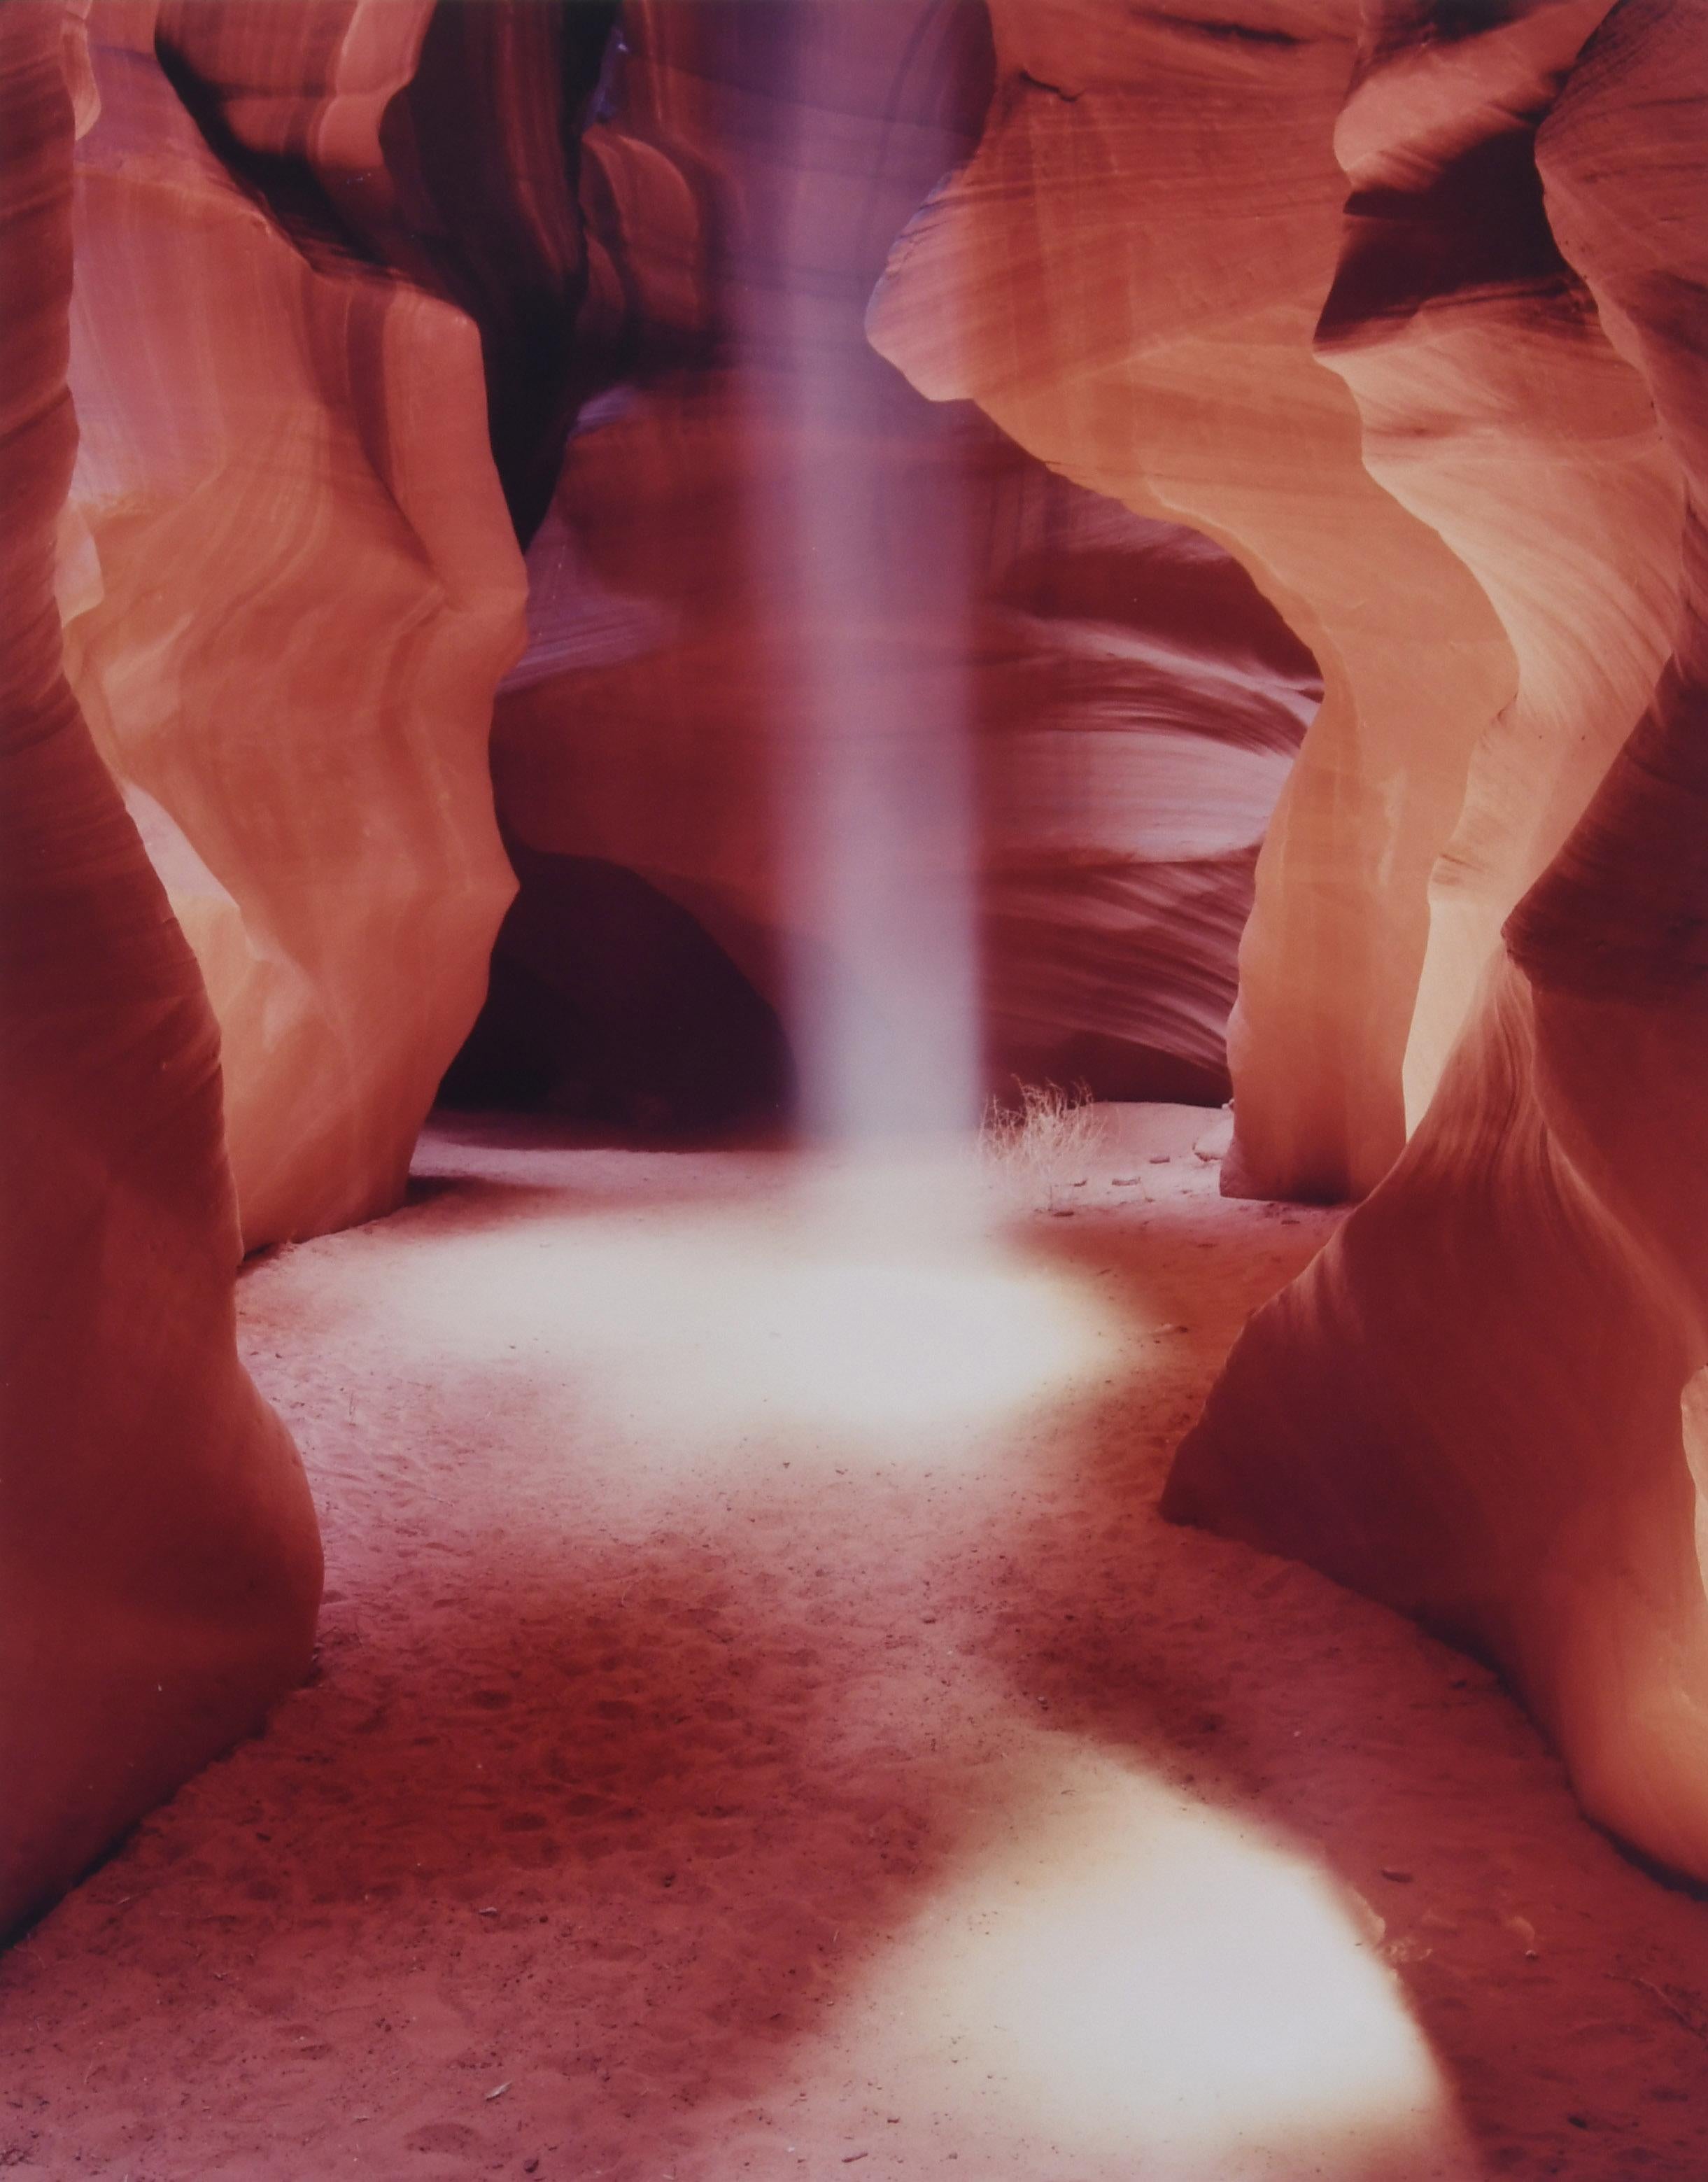 Unknown Landscape Photograph - Shaft of light in Upper Antelope Canyon, near Page, Arizona, Navajo Nation